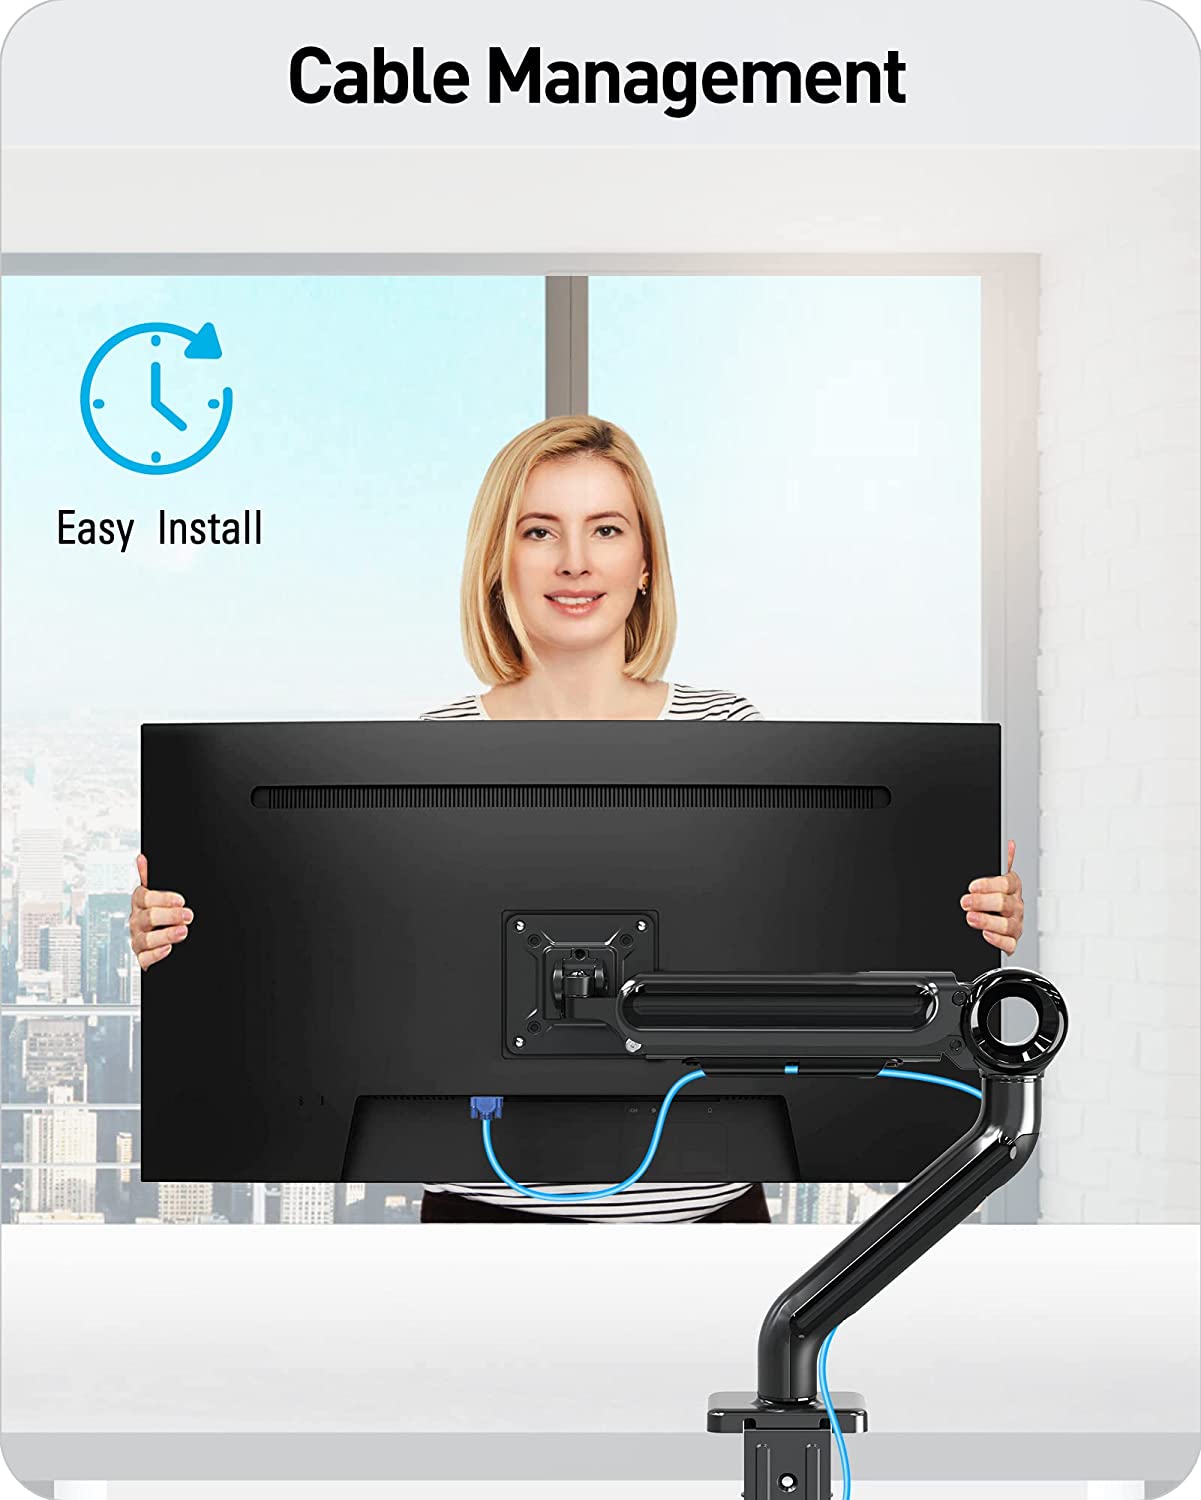 easy to install the single monitor arm and manage the cables